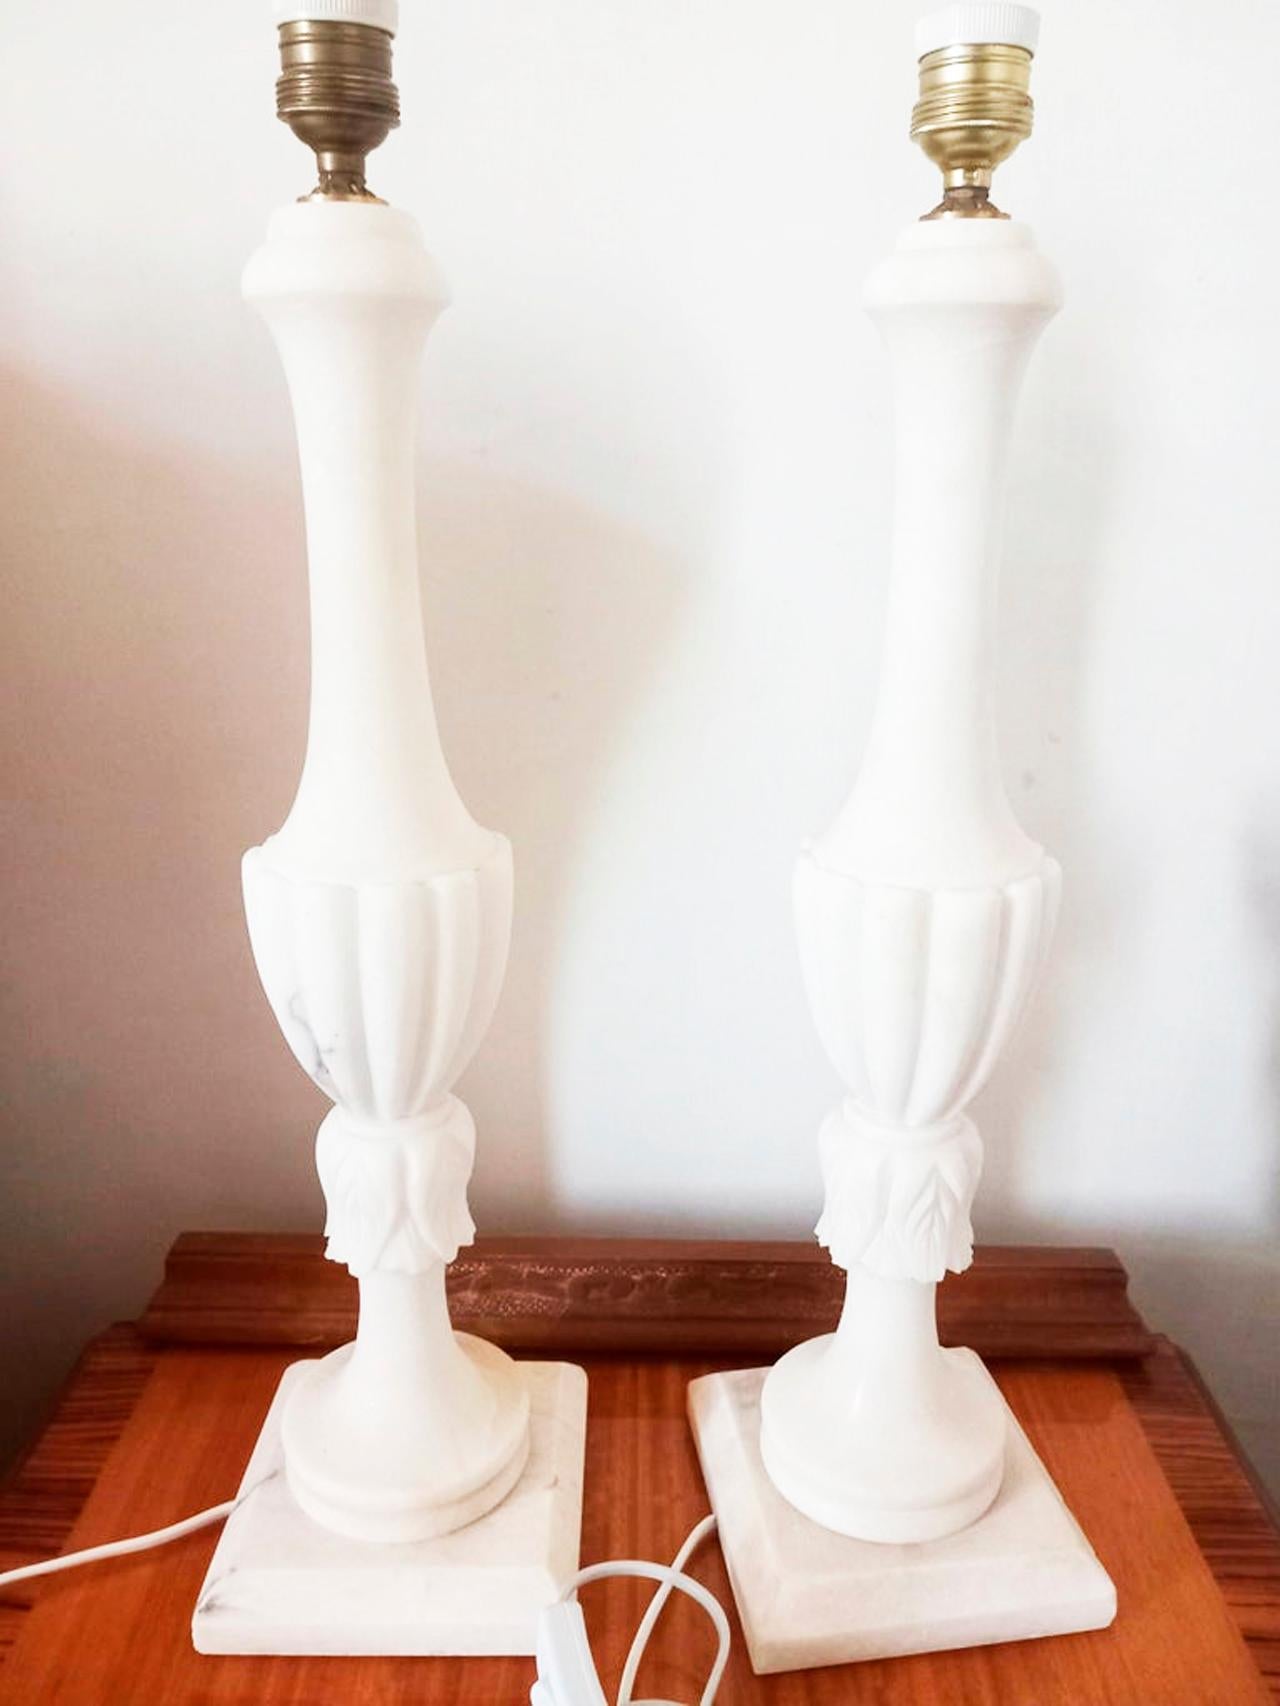  Extra Large Alabaster or Mrble Table Lamps  White Color 57 cm (without screens) For Sale 2